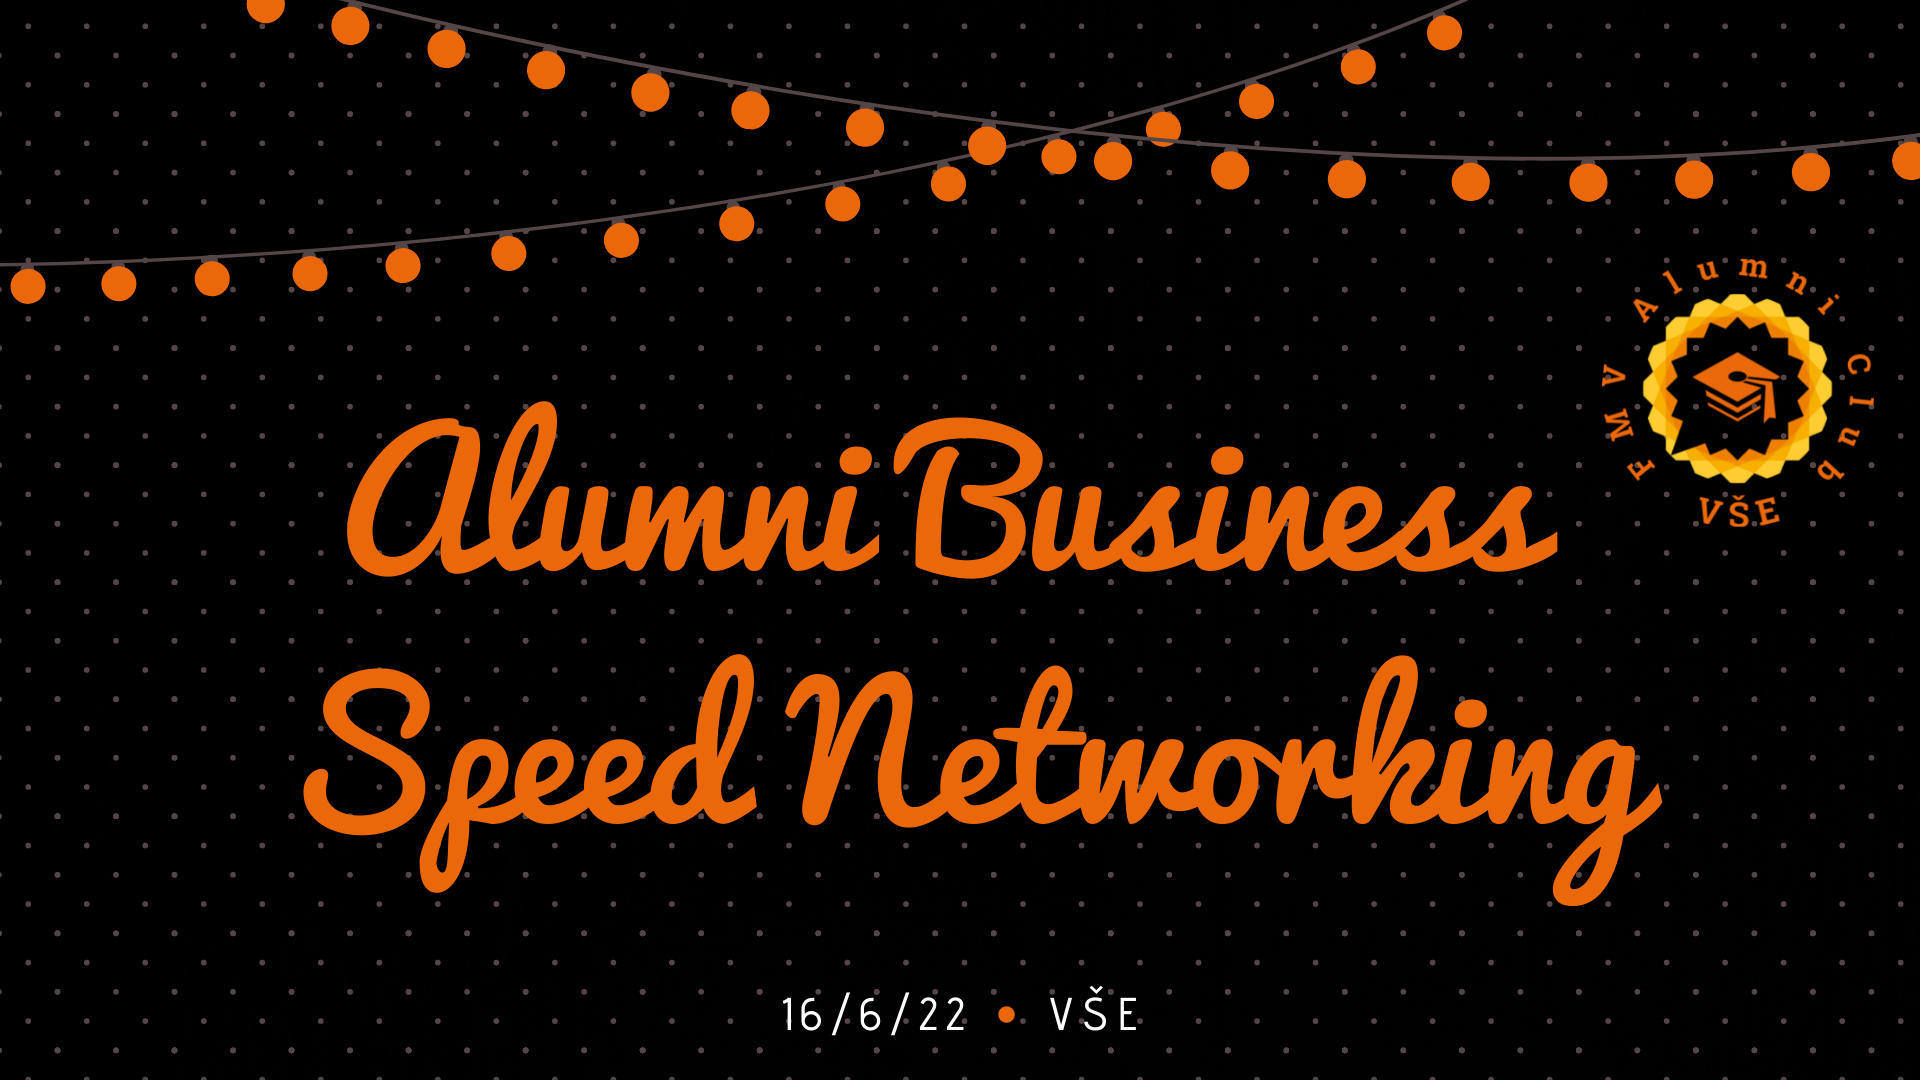 Come and connect with other FIR alumni! Alumni Business Speed Networking for FIR graduates